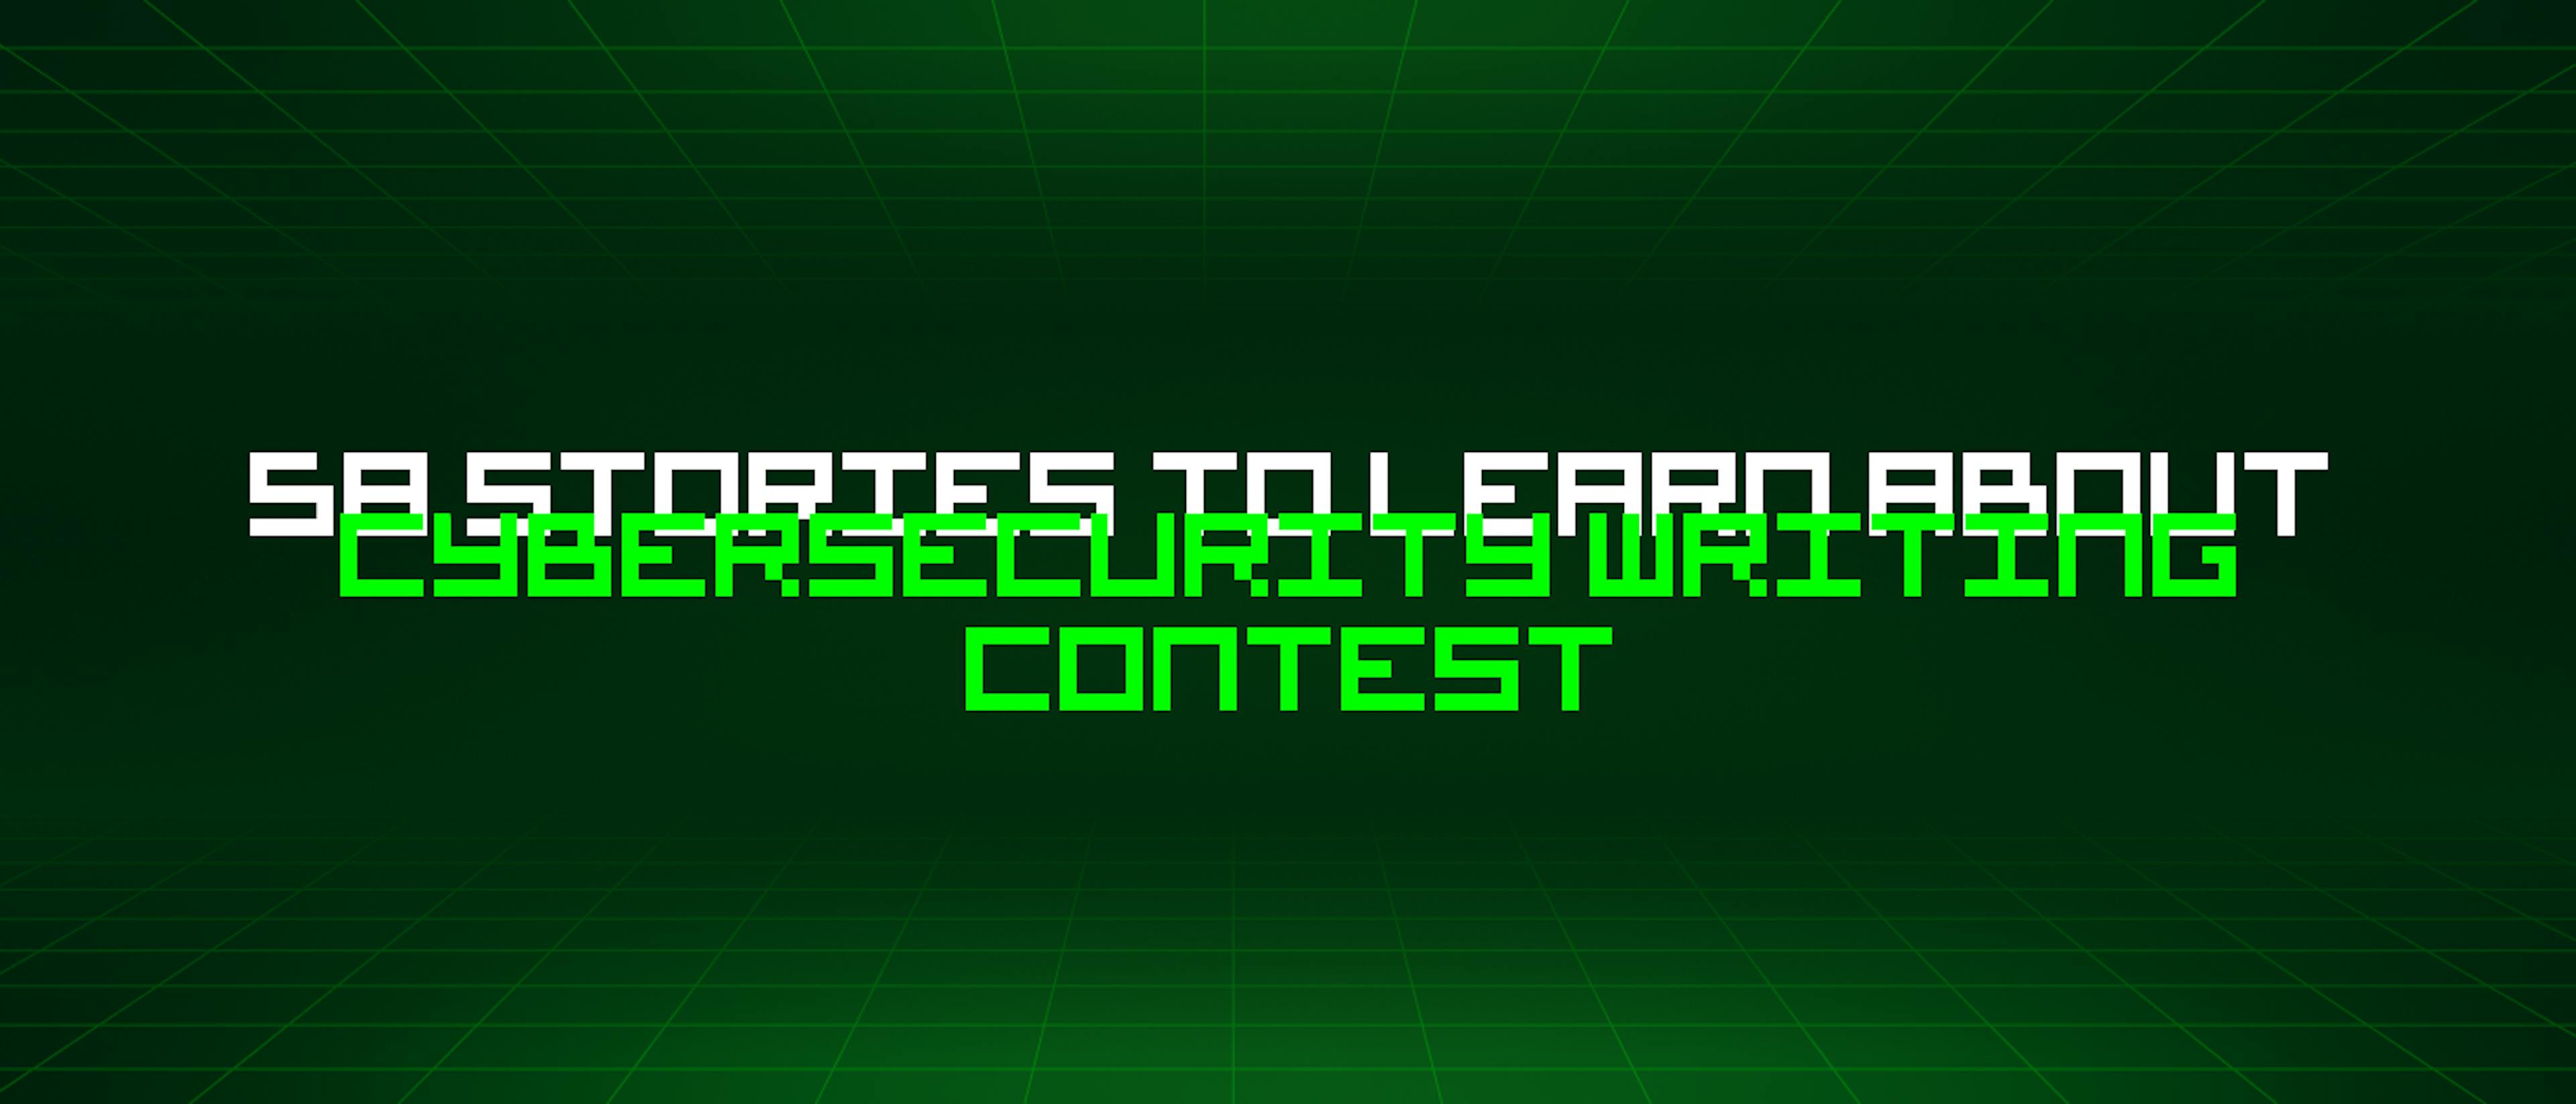 featured image - 58 Stories To Learn About Cybersecurity Writing Contest